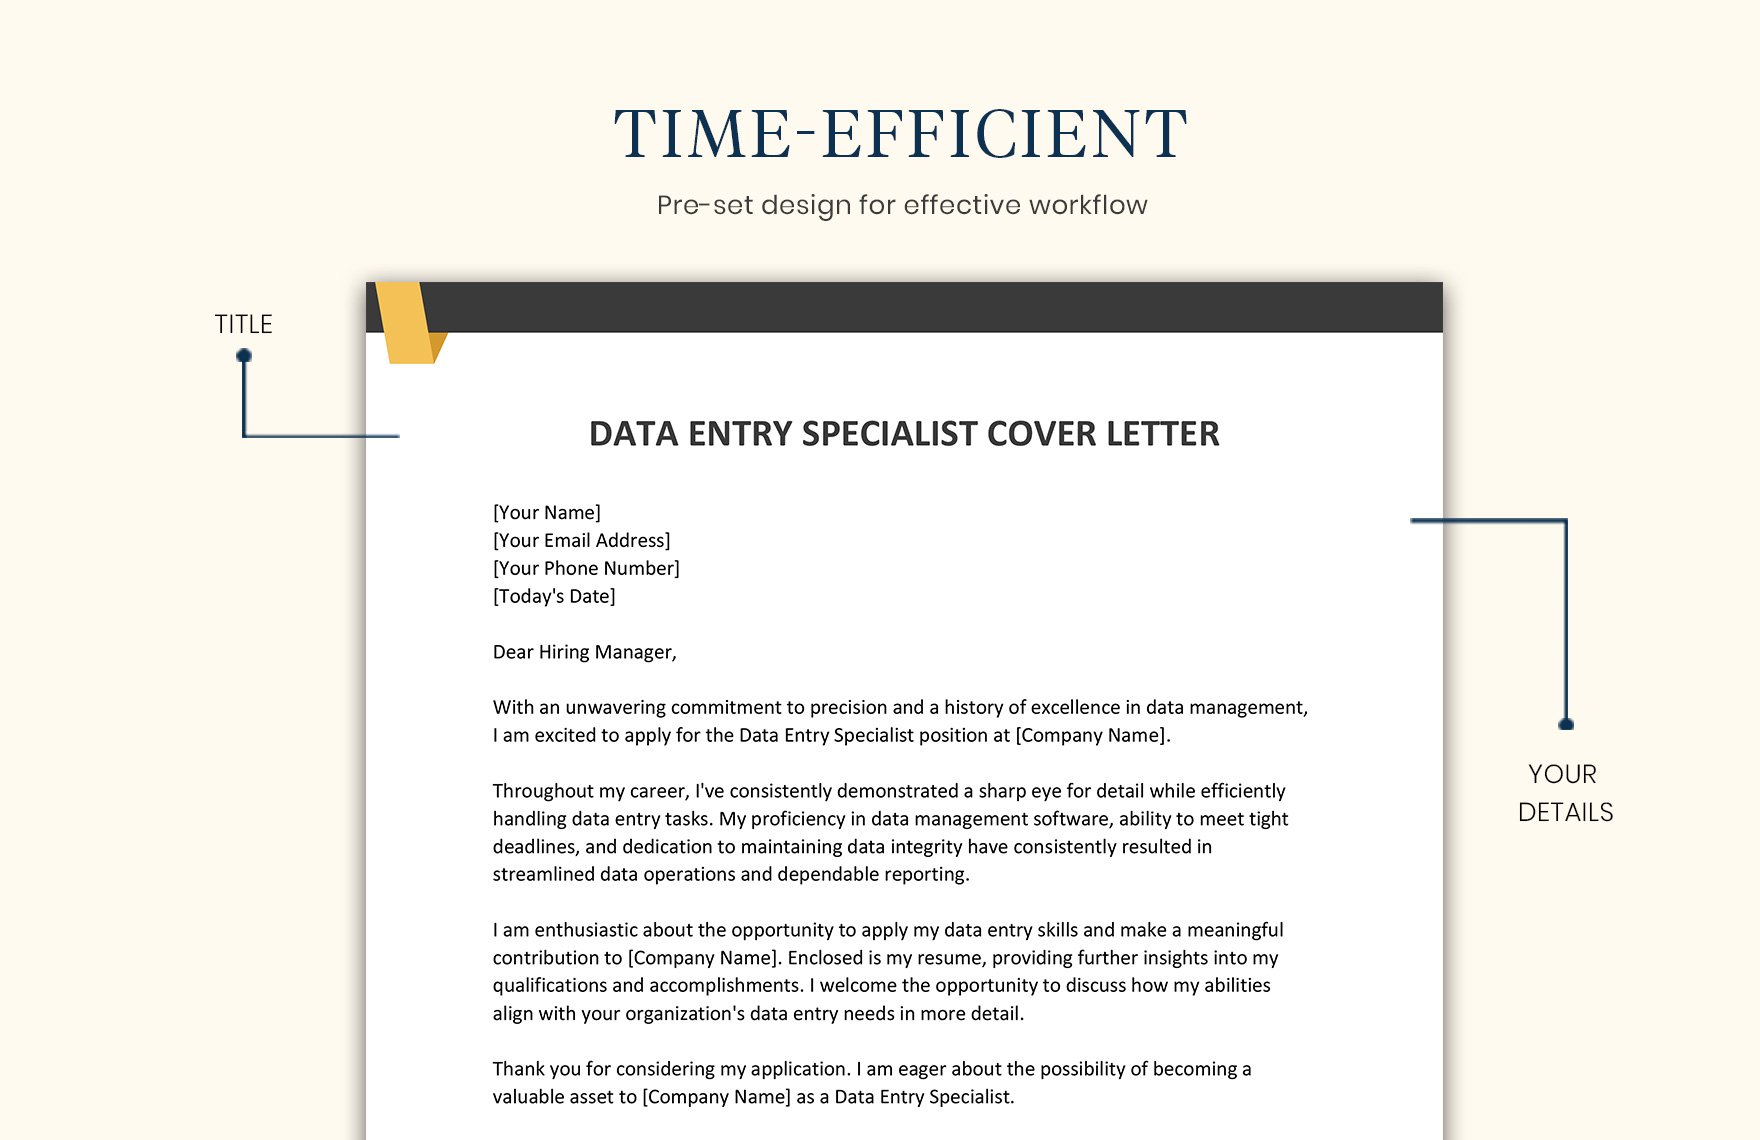 Data Entry Specialist Cover Letter